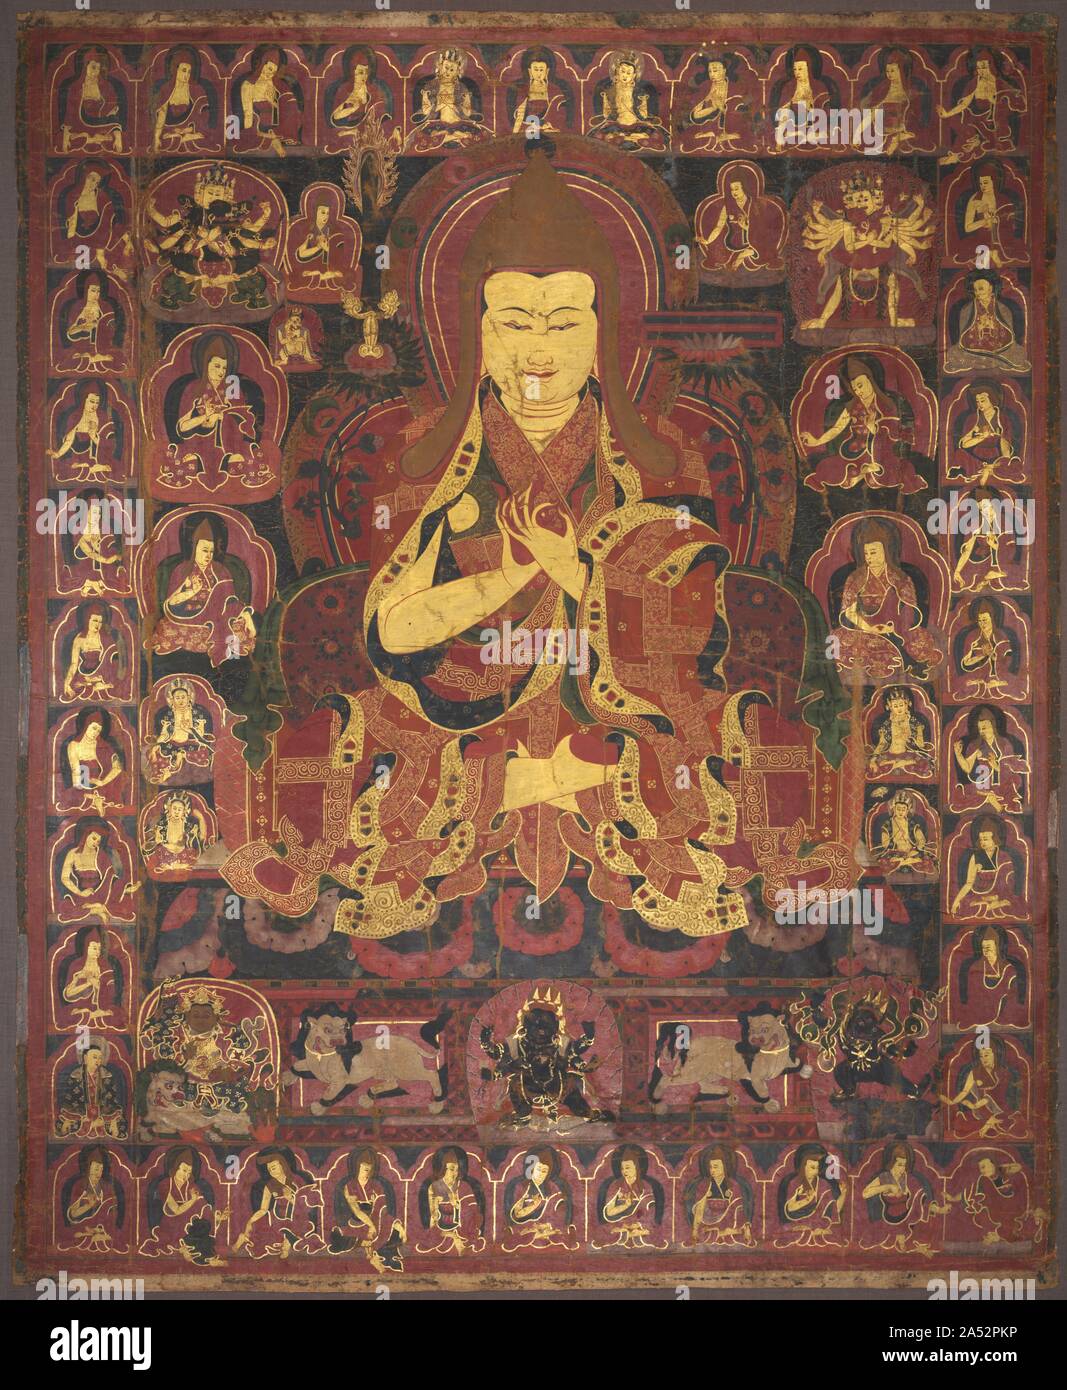 Tsong Khapa, Founder of the Geluk Order, c. 1440-1470. The Buddhist order to which the Dalai Lamas belong was founded by Tsong Khapa (1357-1419), whose image is seen here as the large central figure holding his hands in the teaching mudra. He wears the pointed golden hat that is the insignia for monks of the Geluk order. At the level of his ears are the sword and book, emblems of Manjushri, the bodhisattva of wisdom. These emblems allude to the Tibetan Buddhist tradition that accorded Tsong Khapa the status of being an emanation of Manjushri.  This extraordinary, sumptuously rendered painting, Stock Photo